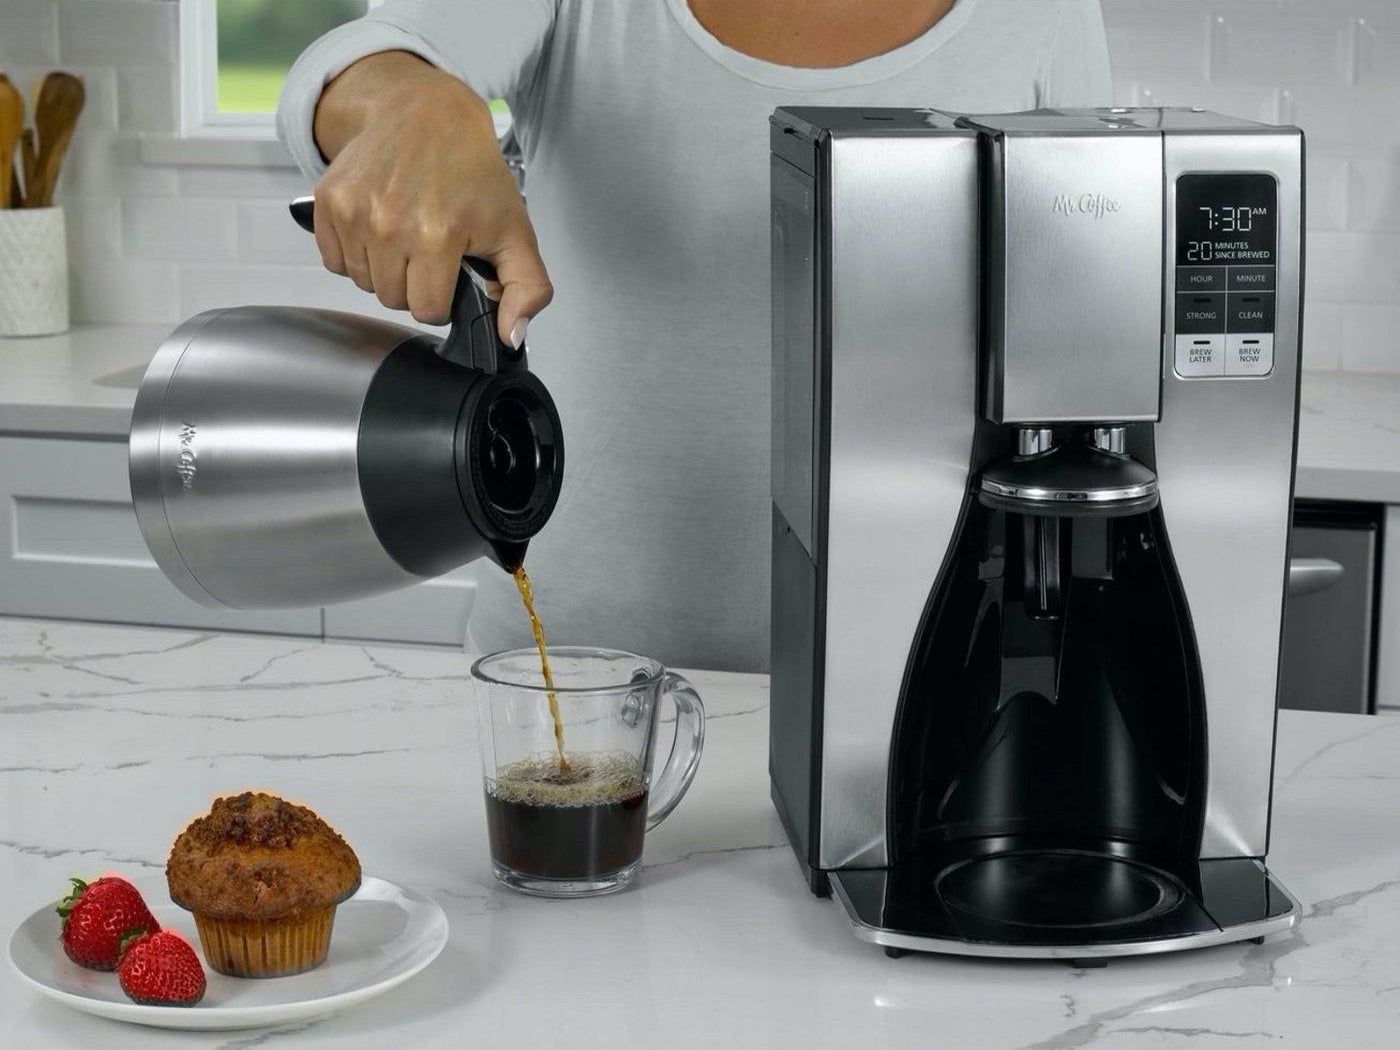 a woman pouring coffee into a coffee mug next to a coffee maker, a carafe, and a plate with a muffin and strawberries